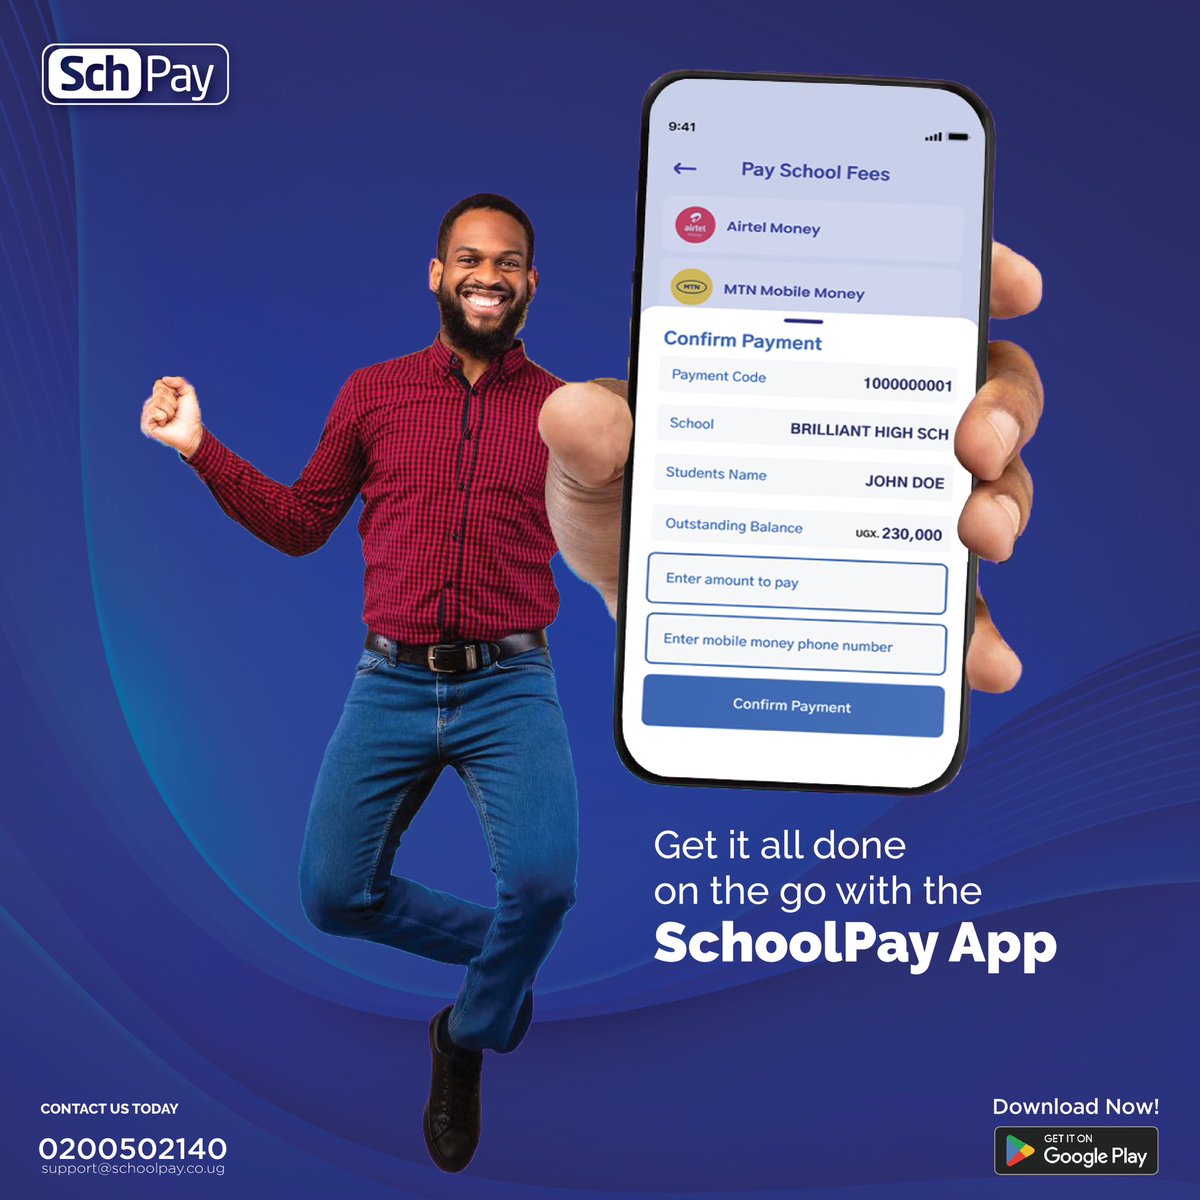 Yesss! Get it all done on the SchoolPay App and wrap up the week in style. 
#DownloadNow
#SchoolPay